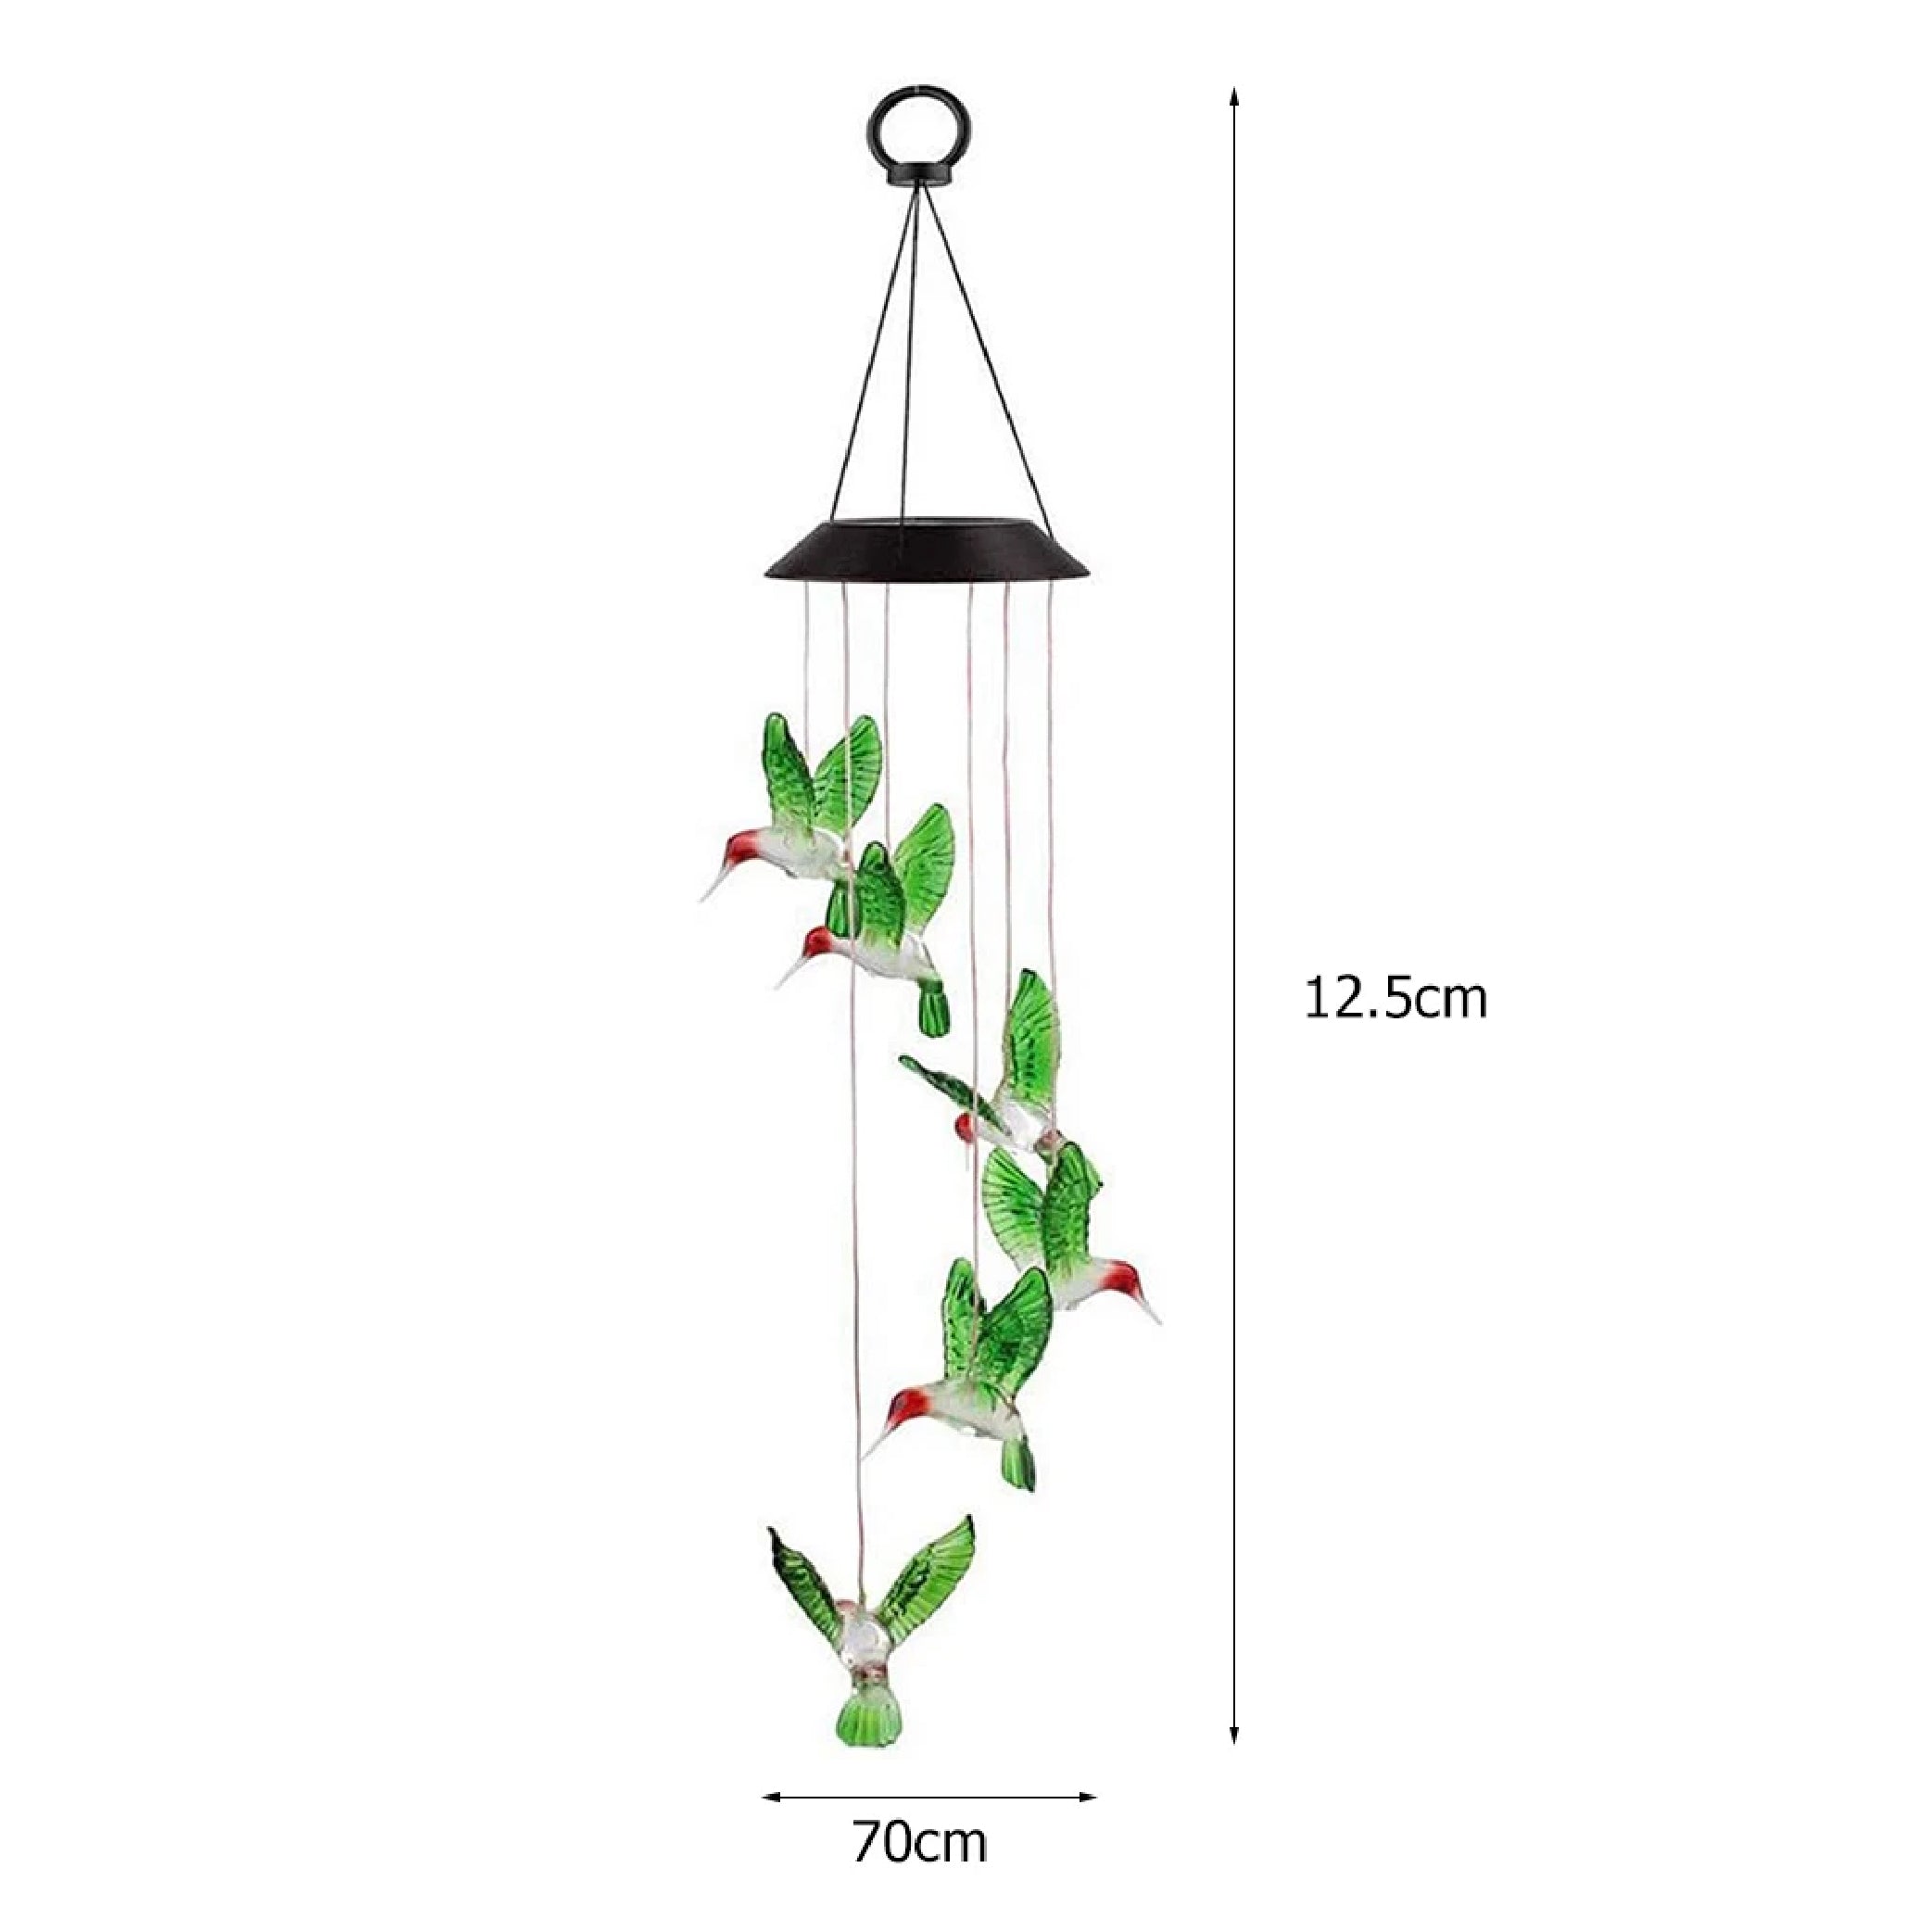 LED Colorful Solar Power Wind Chime Crystal Hummingbird Butterfly Waterproof Outdoor Windchime Solar Light for Garden outdoor